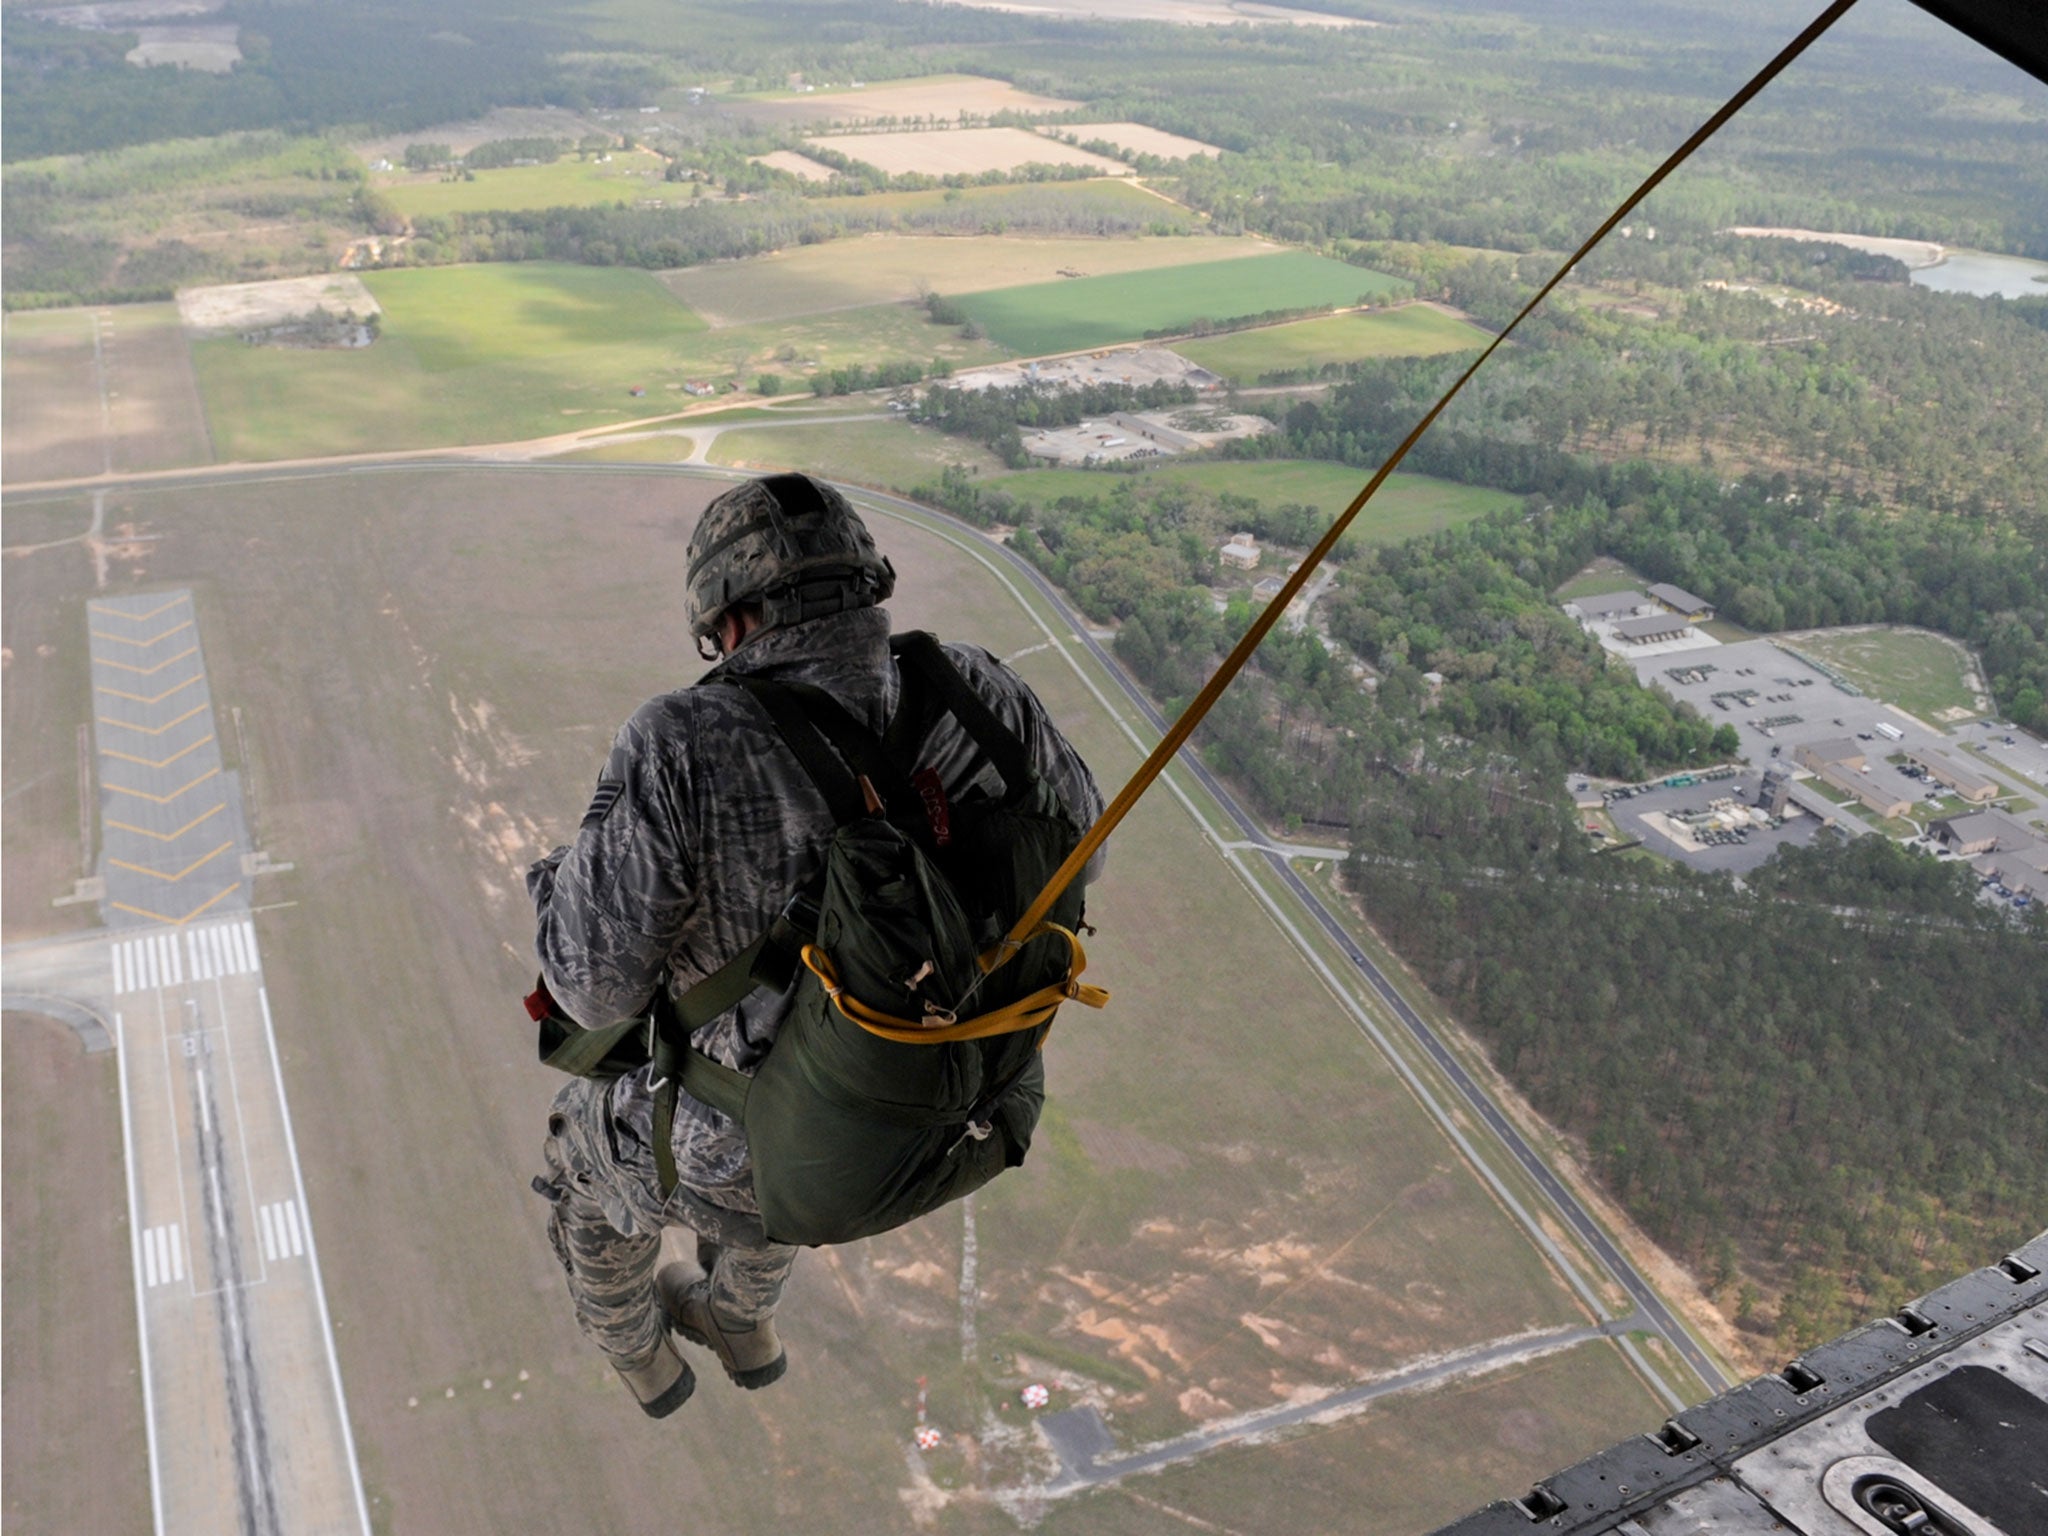 A US Air Force parachutist jumps out of a plane above Moody Air Force Base